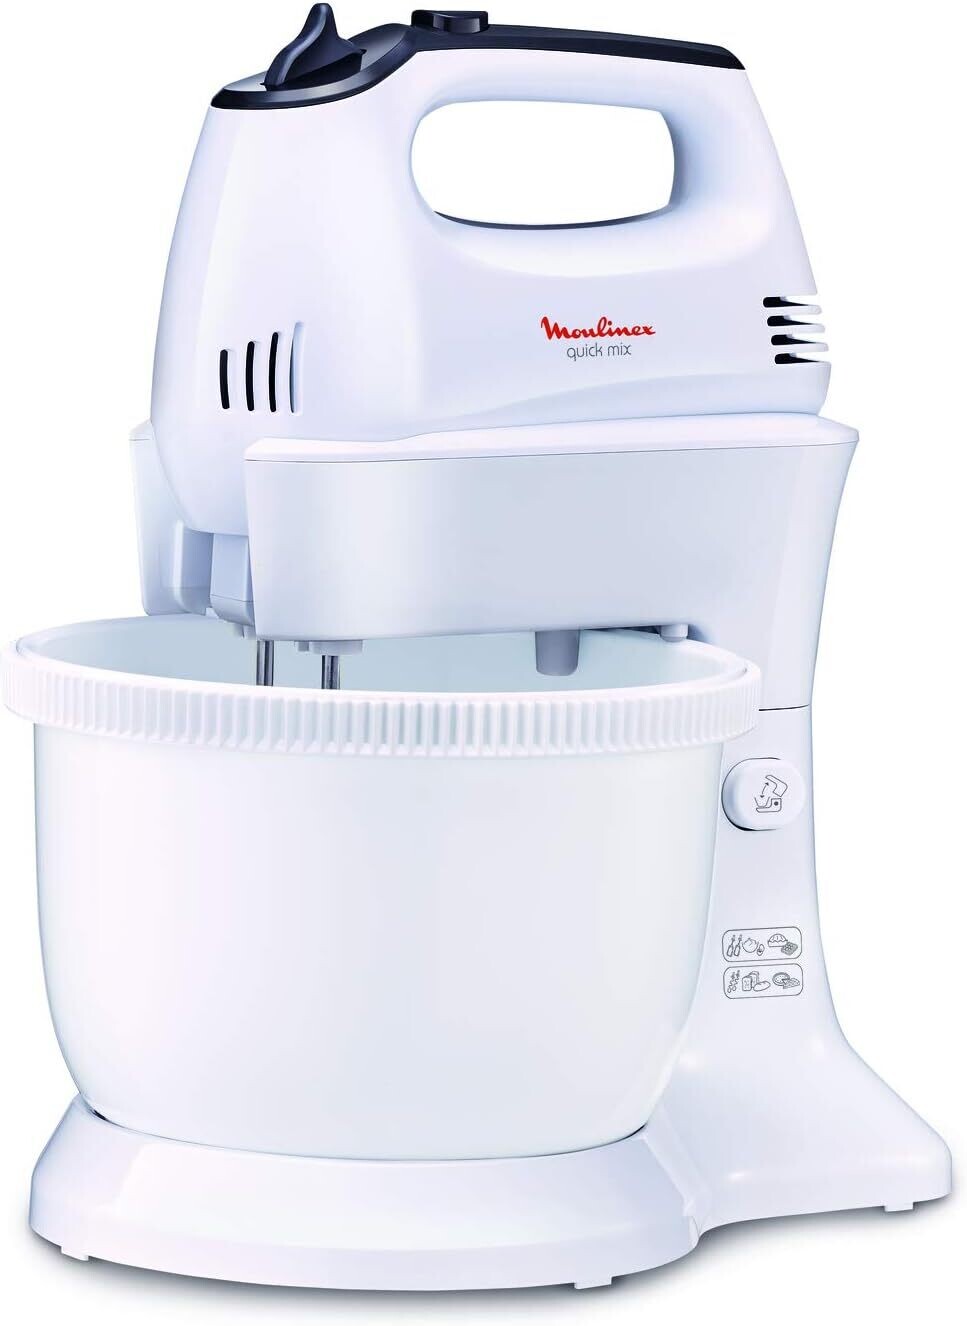 Moulinex QuickMix Hand Mixer with Stand Bowl - Effortless Mixing for Perfect Bakes, HM311127